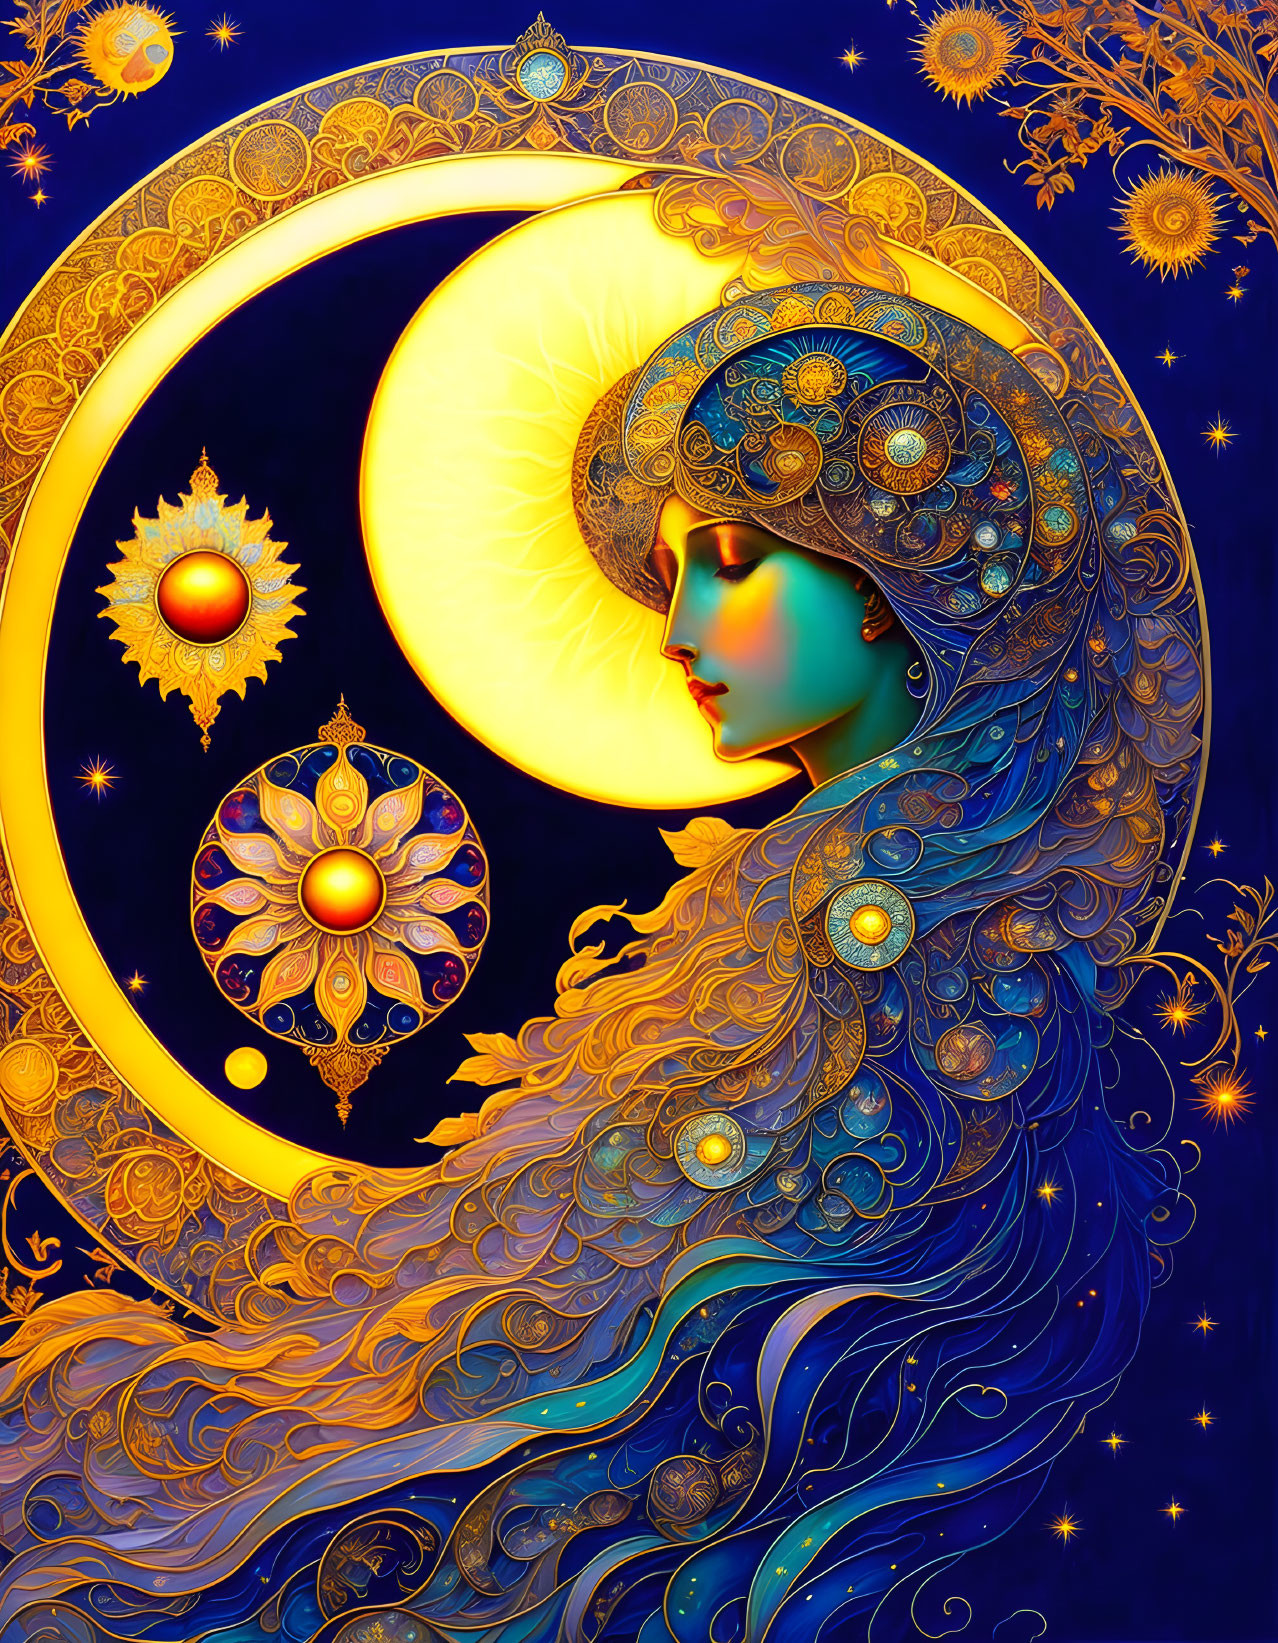 Illustration of woman with moon halo in gold and blue against starry sky